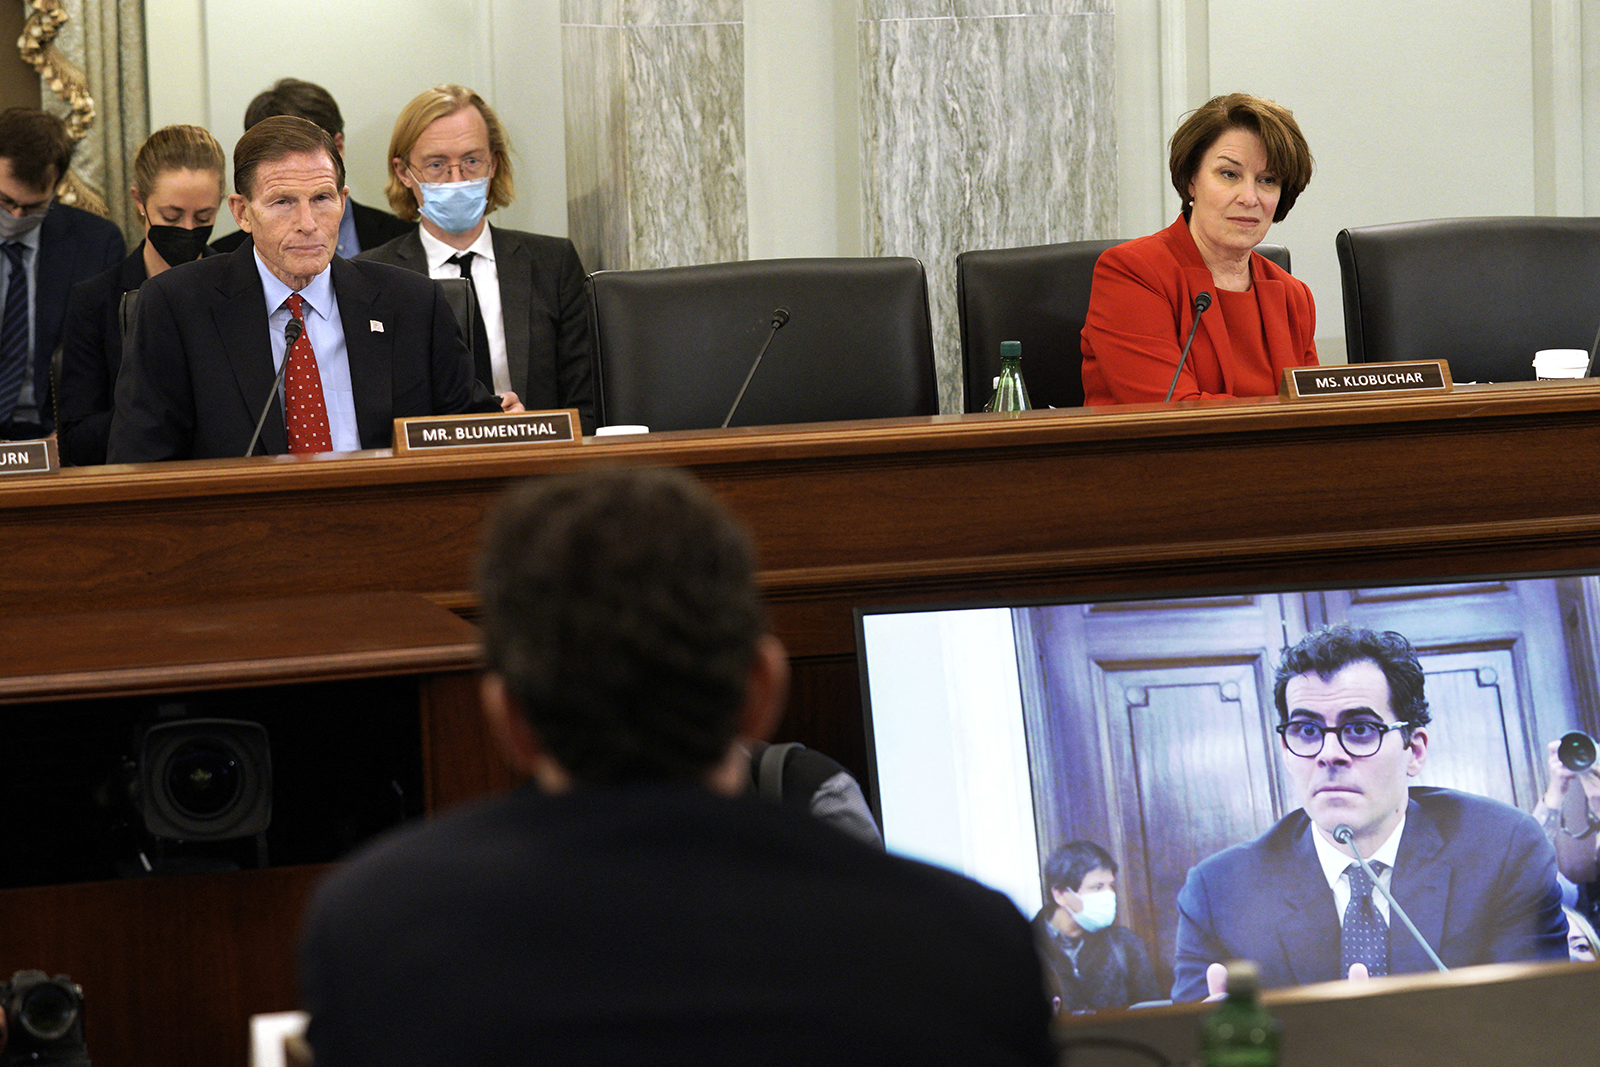 Senators Blumenthal and Klobuchar listen as head of Instagram Adam Mosseri testifies before a Senate Commerce, Science and Transportation Committee Consumer Protection, Product Safety, and Data Security Subcommittee hearing on Protecting Kids Online on Capitol Hill in Washington on December 8, 2021. 